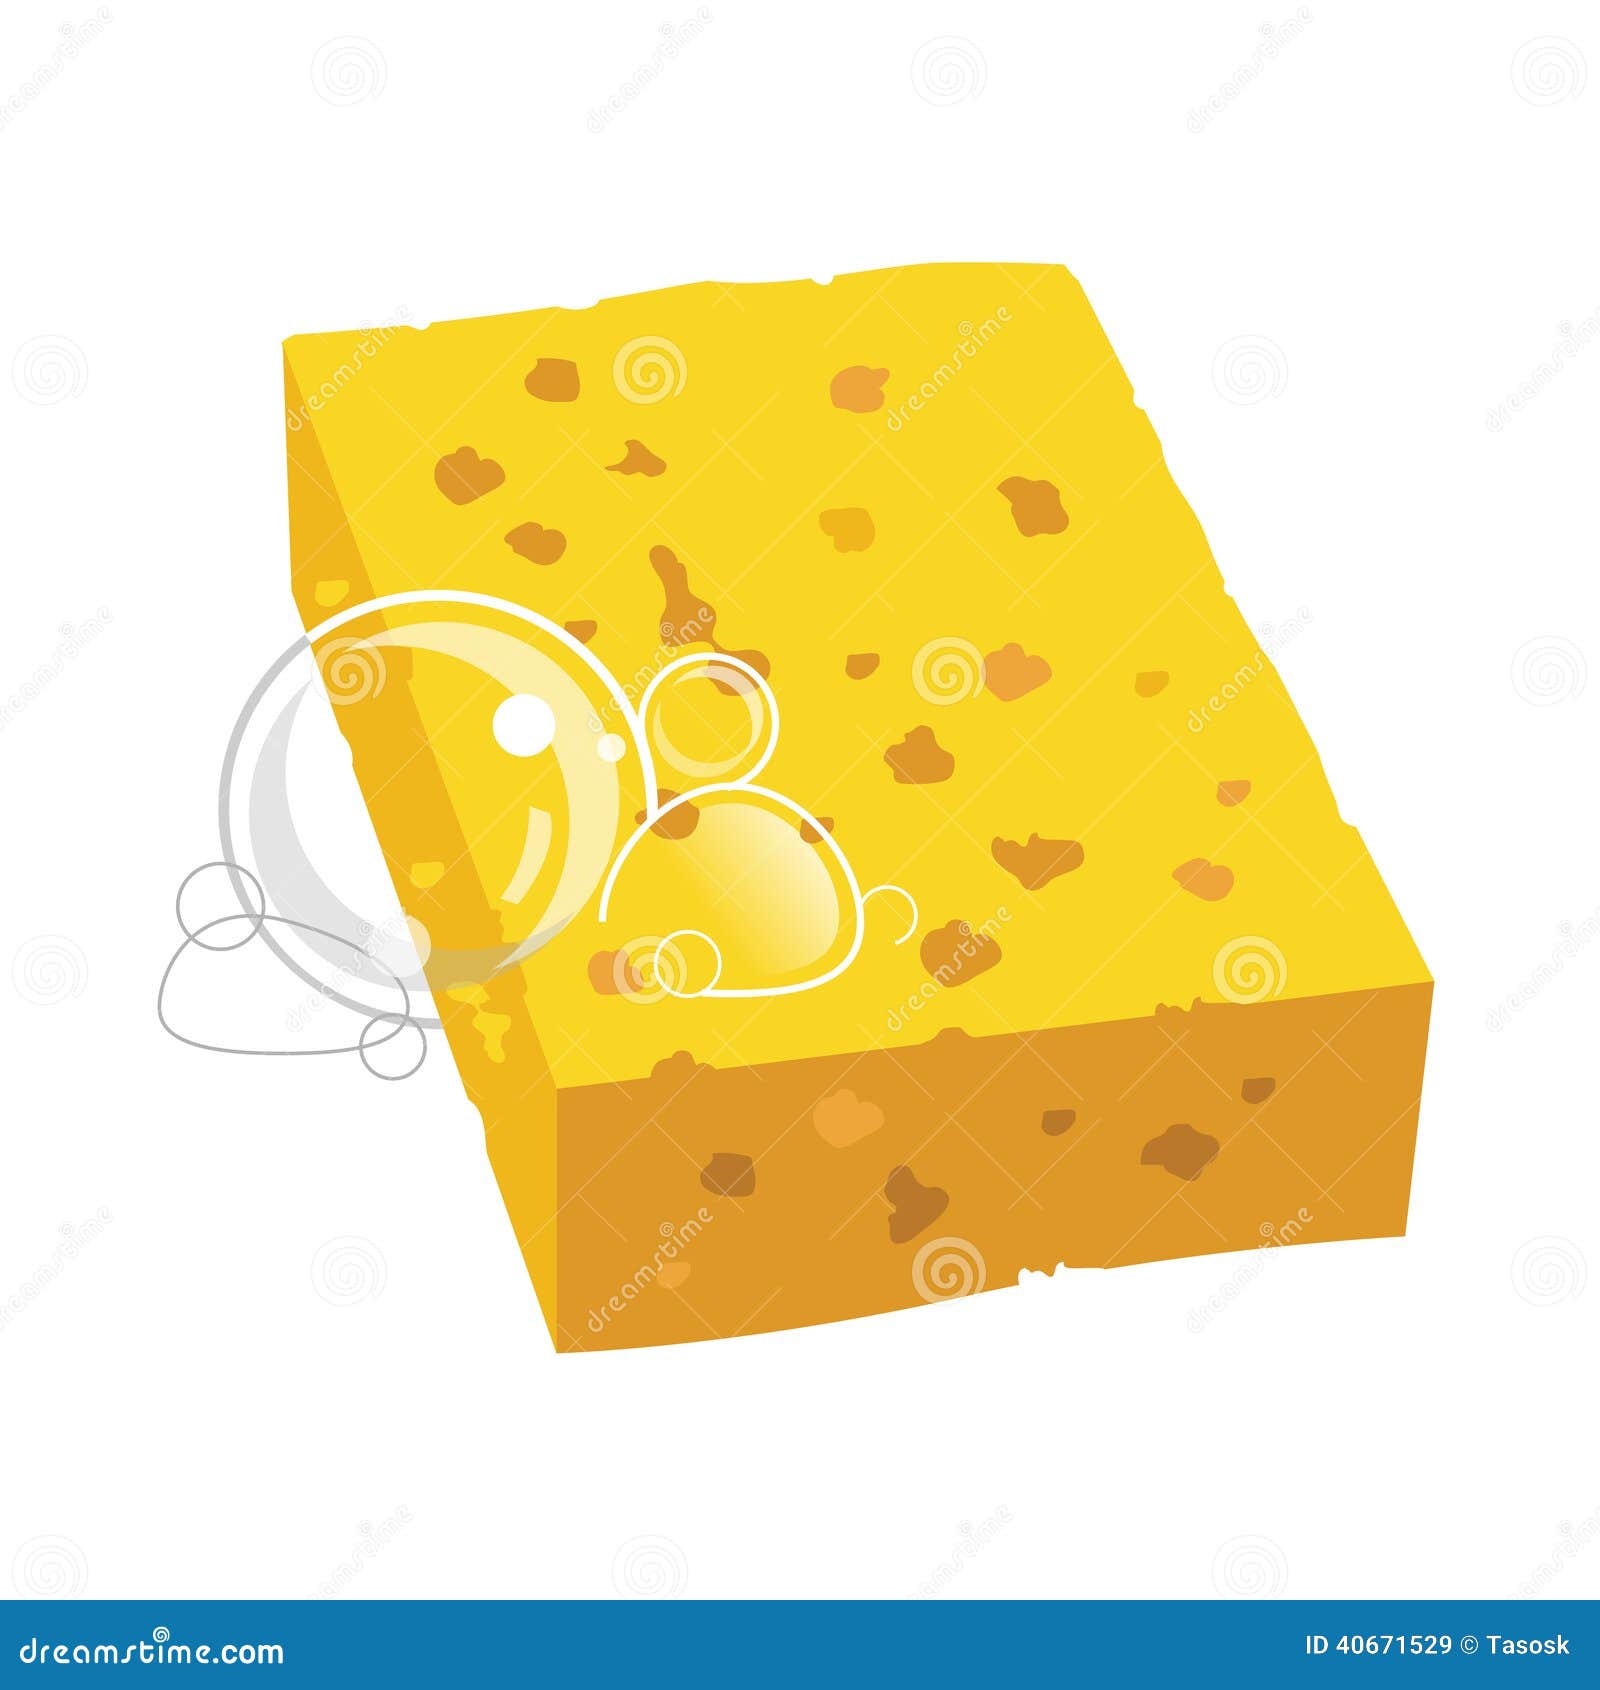 yellow sponge with bubbles